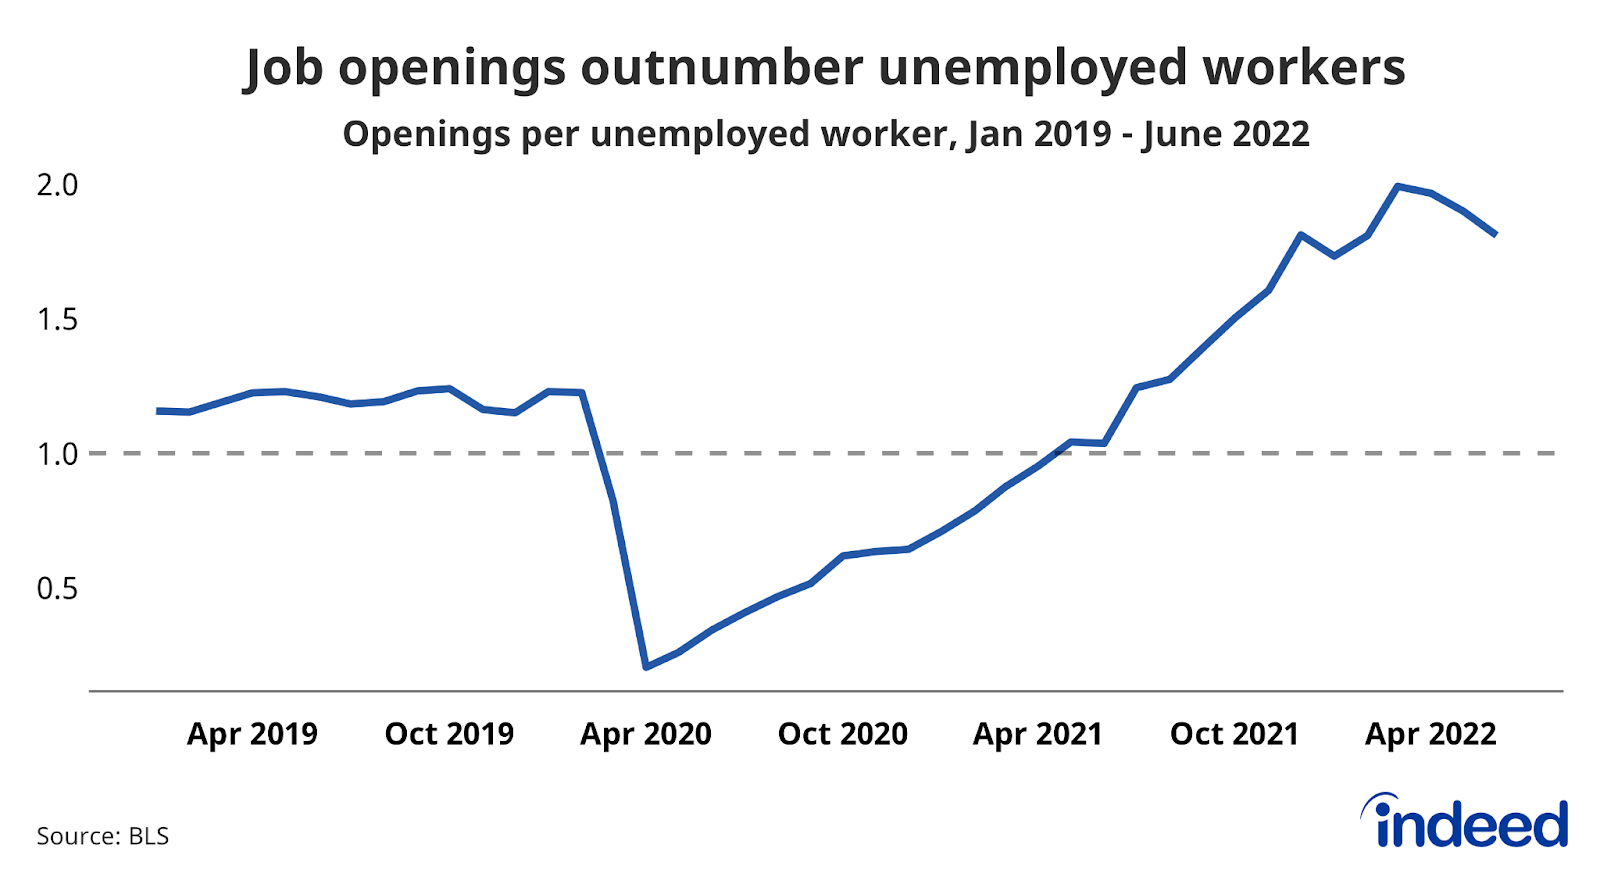 A line chart showing the ratio of job openings to unemployed workers from January 2019 to June 2022.